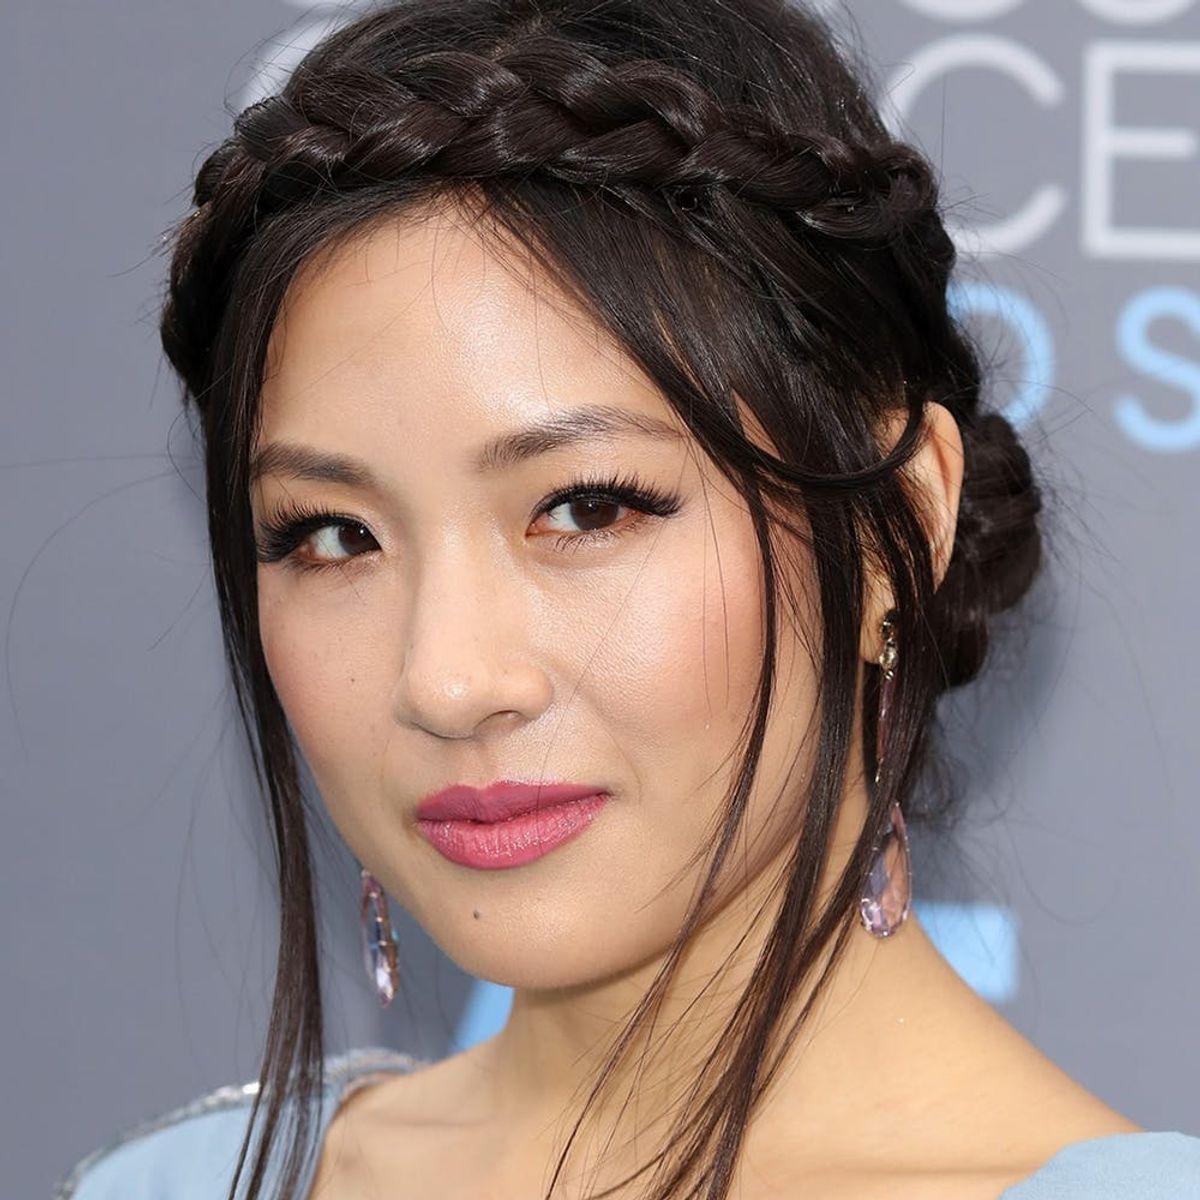 Constance Wu’s New Pink Hair Has Us Wishing for Spring